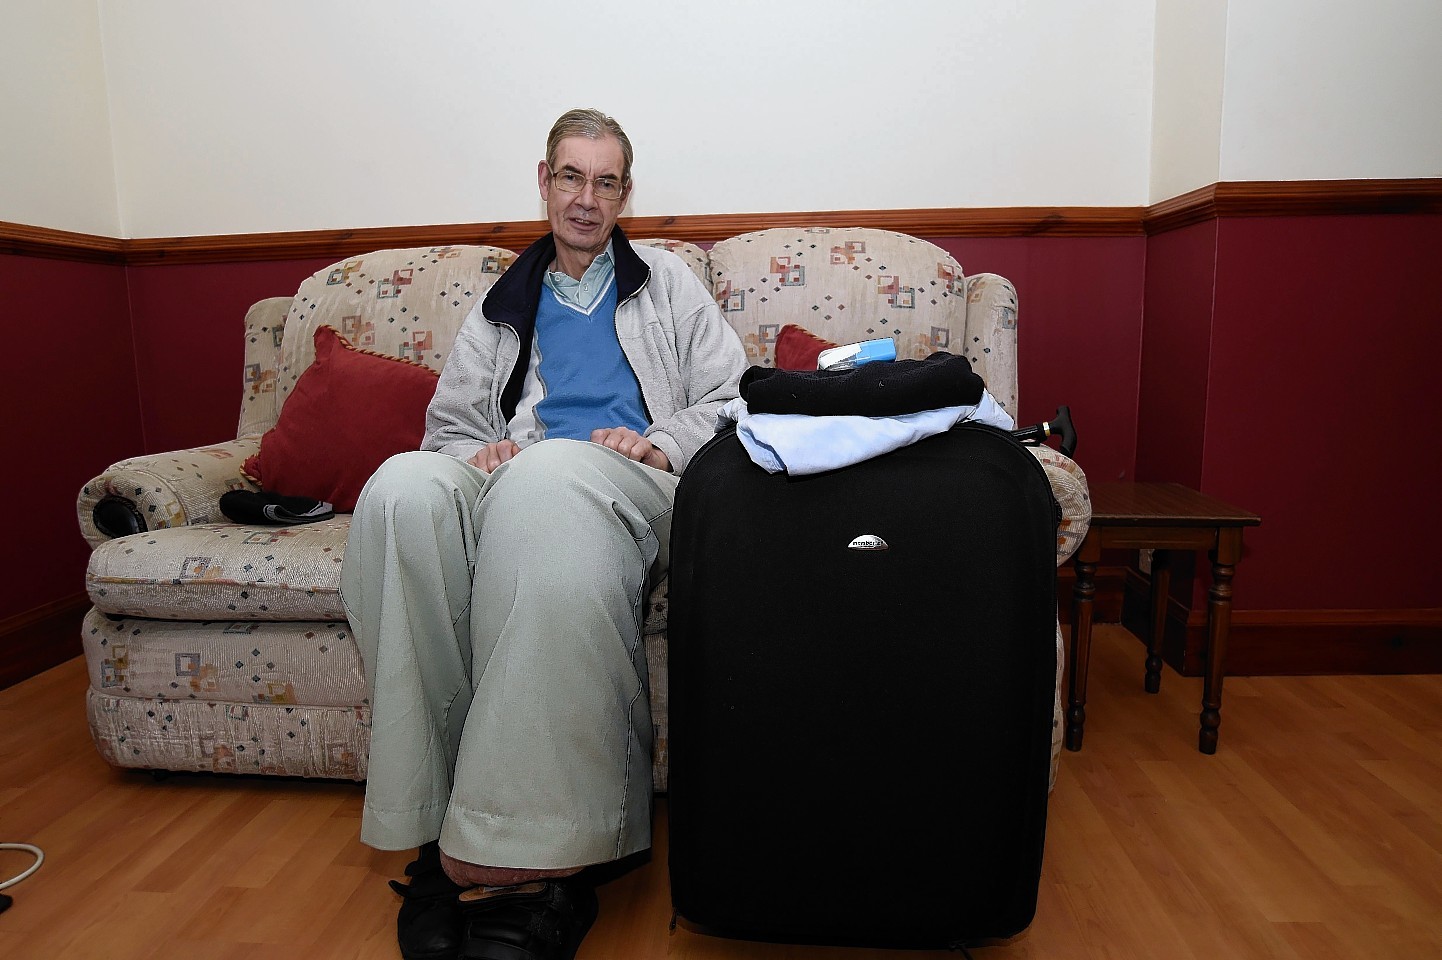 Michael Cull sits by a suitcase he had packed ready for surgery